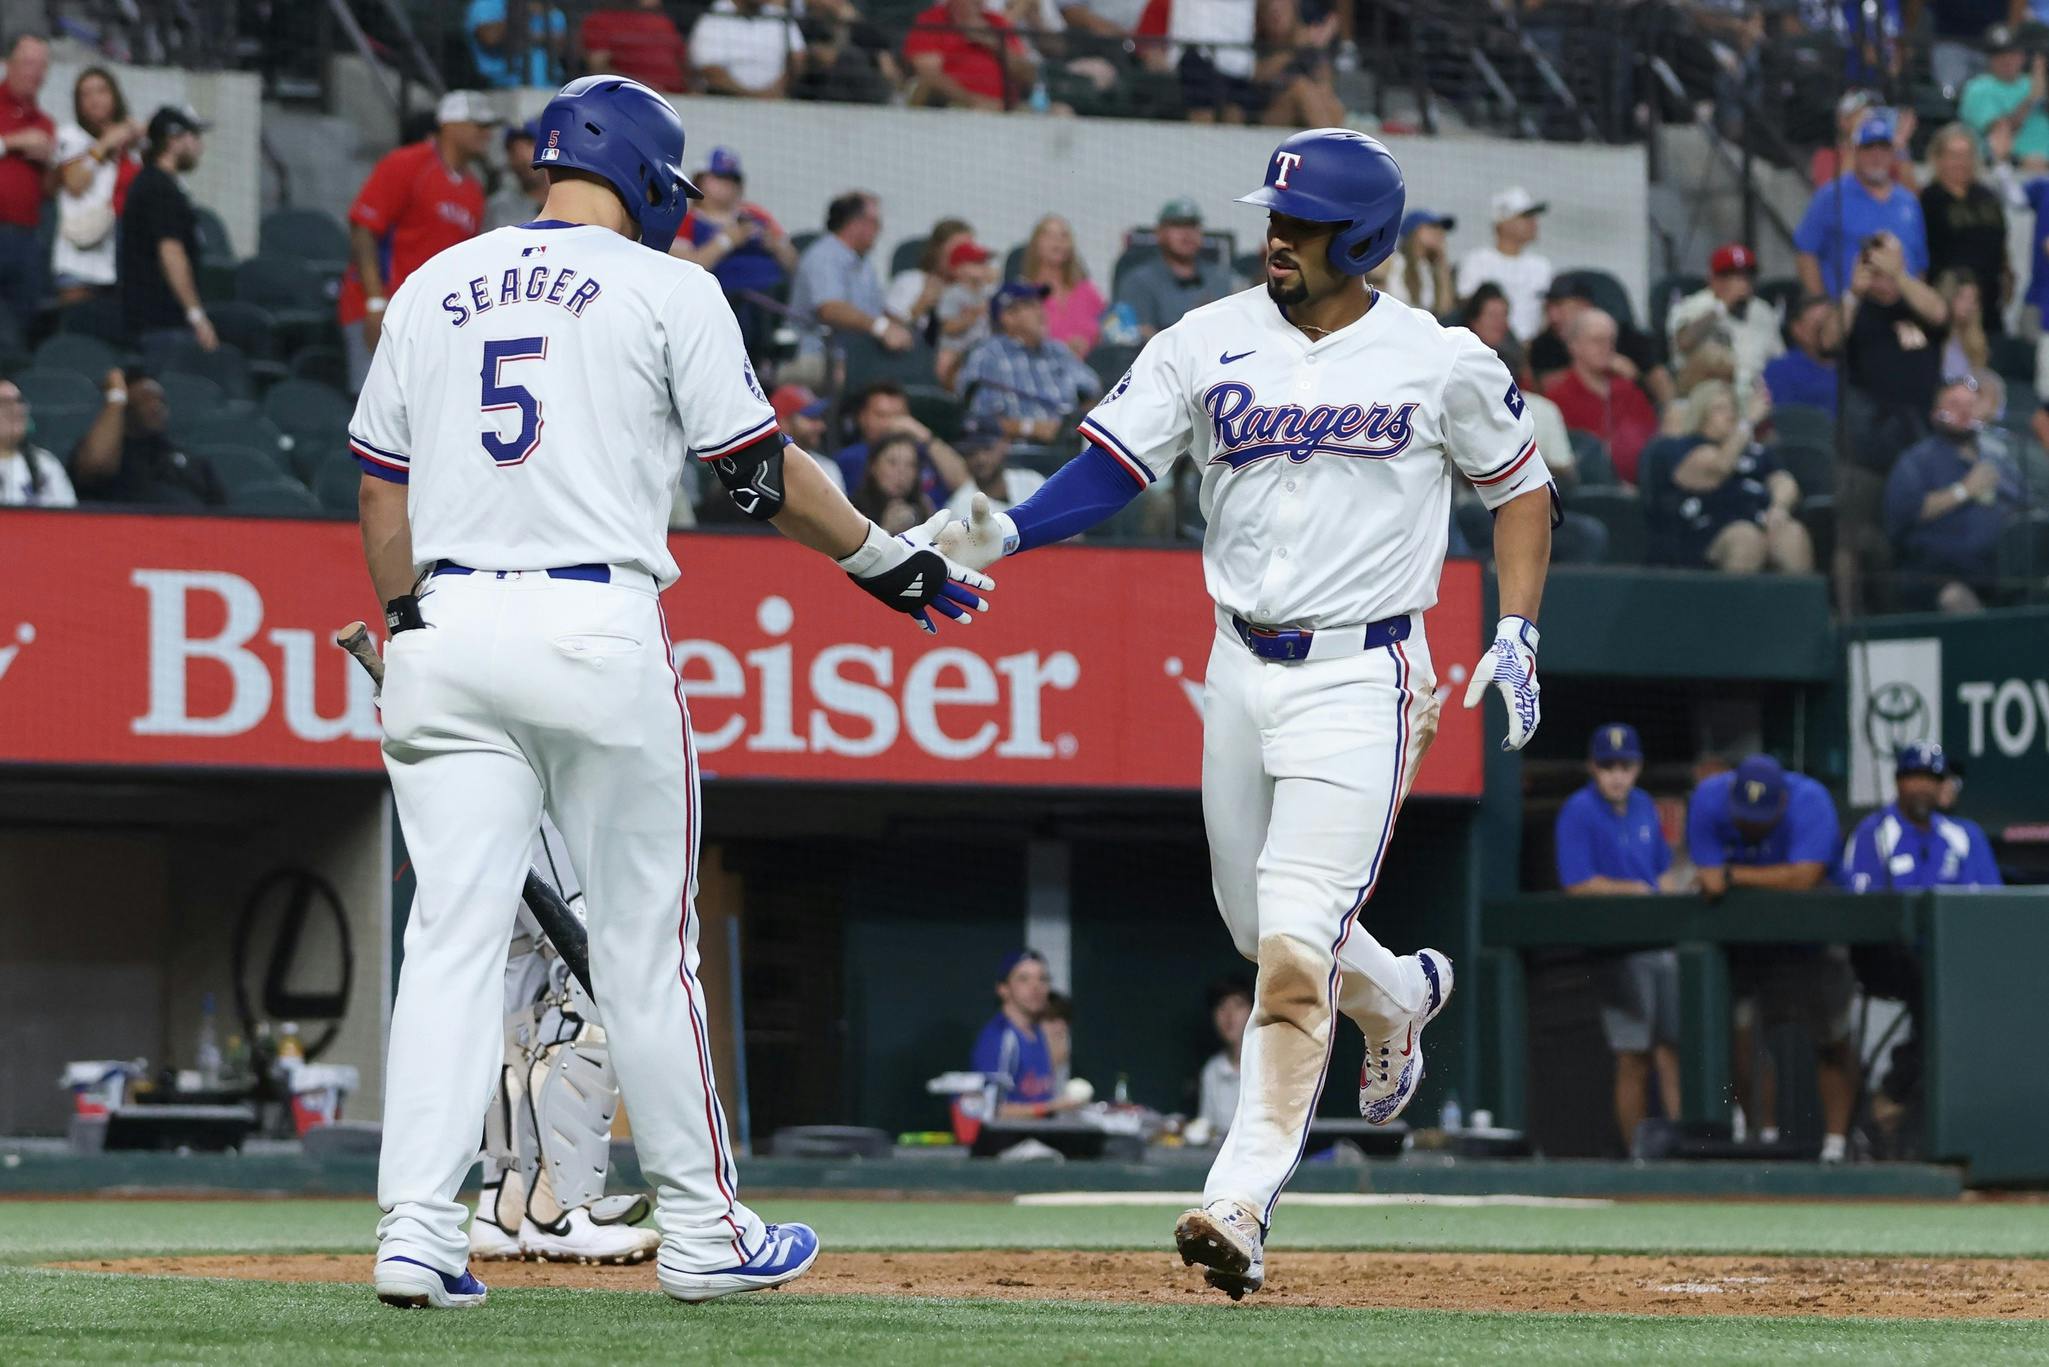 Texas Rangers second base Marcus Semien (2) celebrates with shortstop Corey Seager (5) after hitting a home run against the Chicago White Sox in the third inning at Globe Life Field.